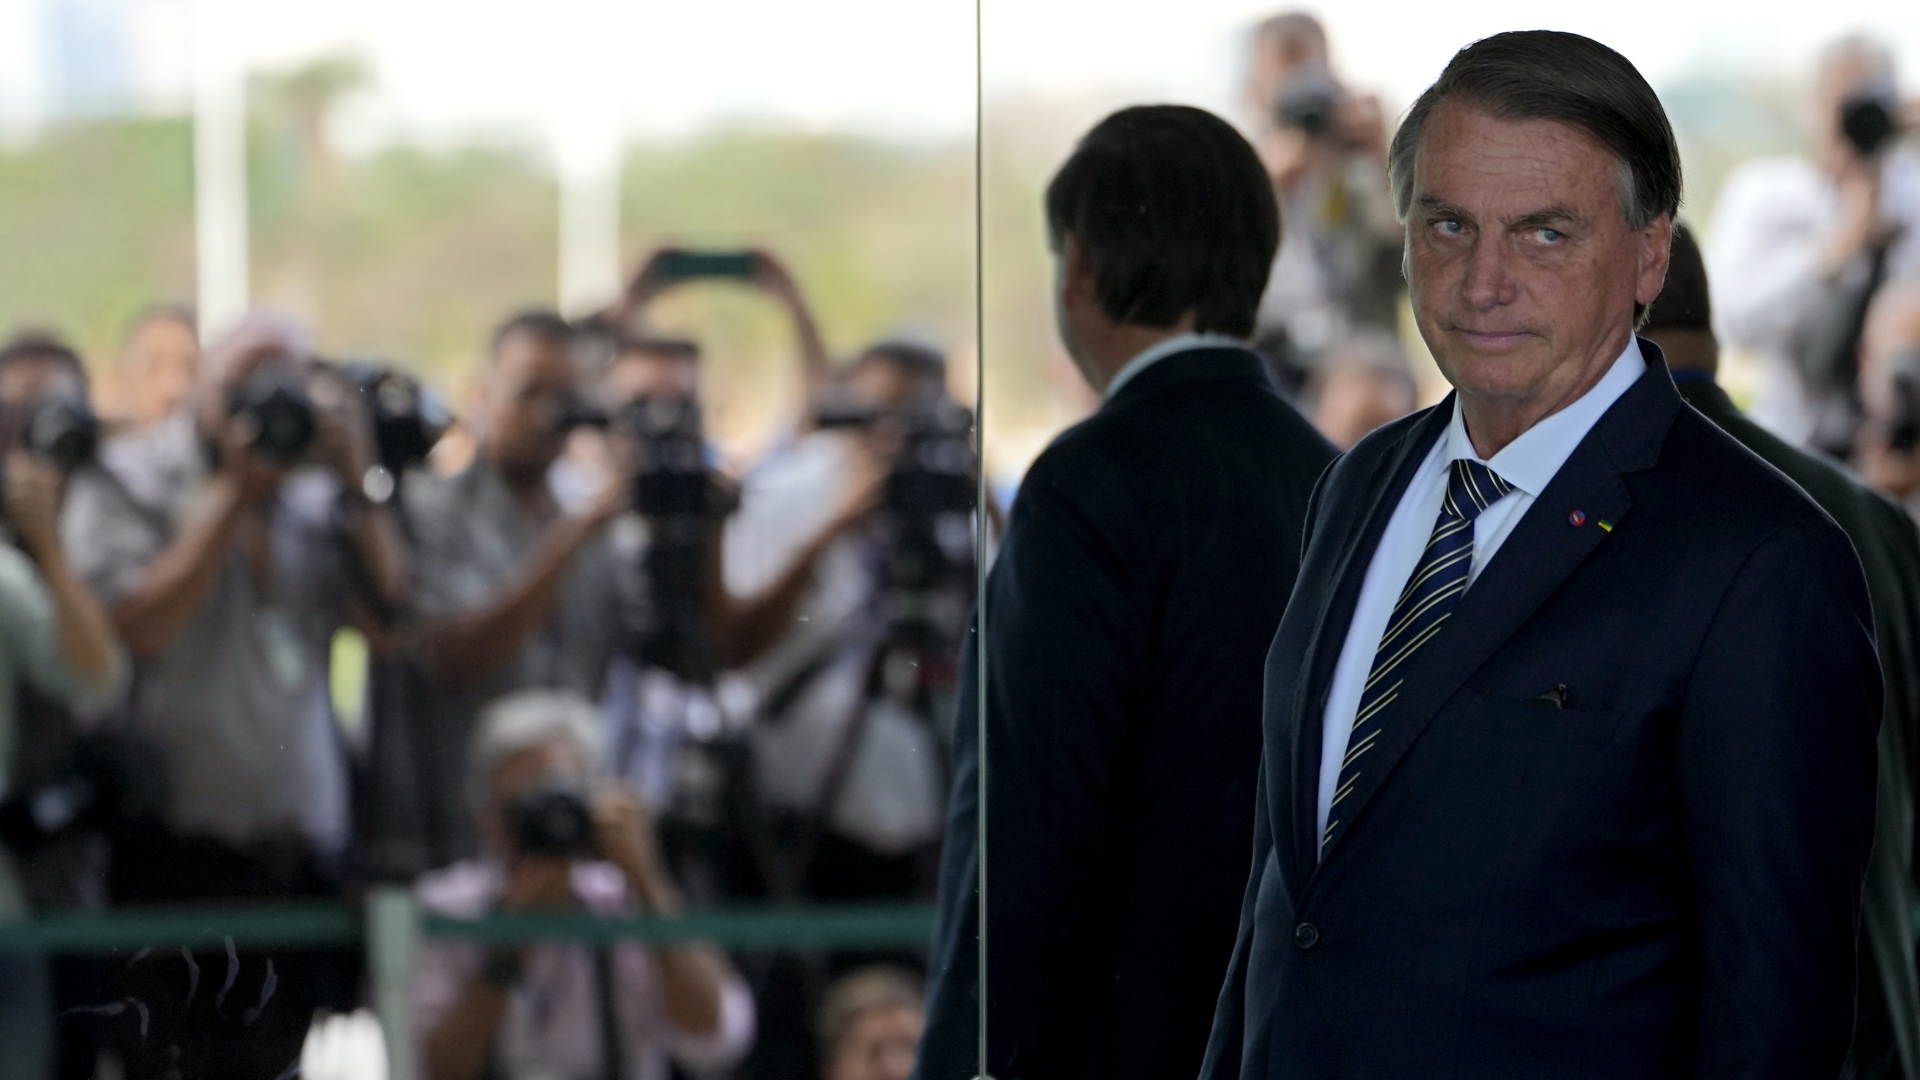 Brazil: Bolsonaro does not want to be leader of the opposition